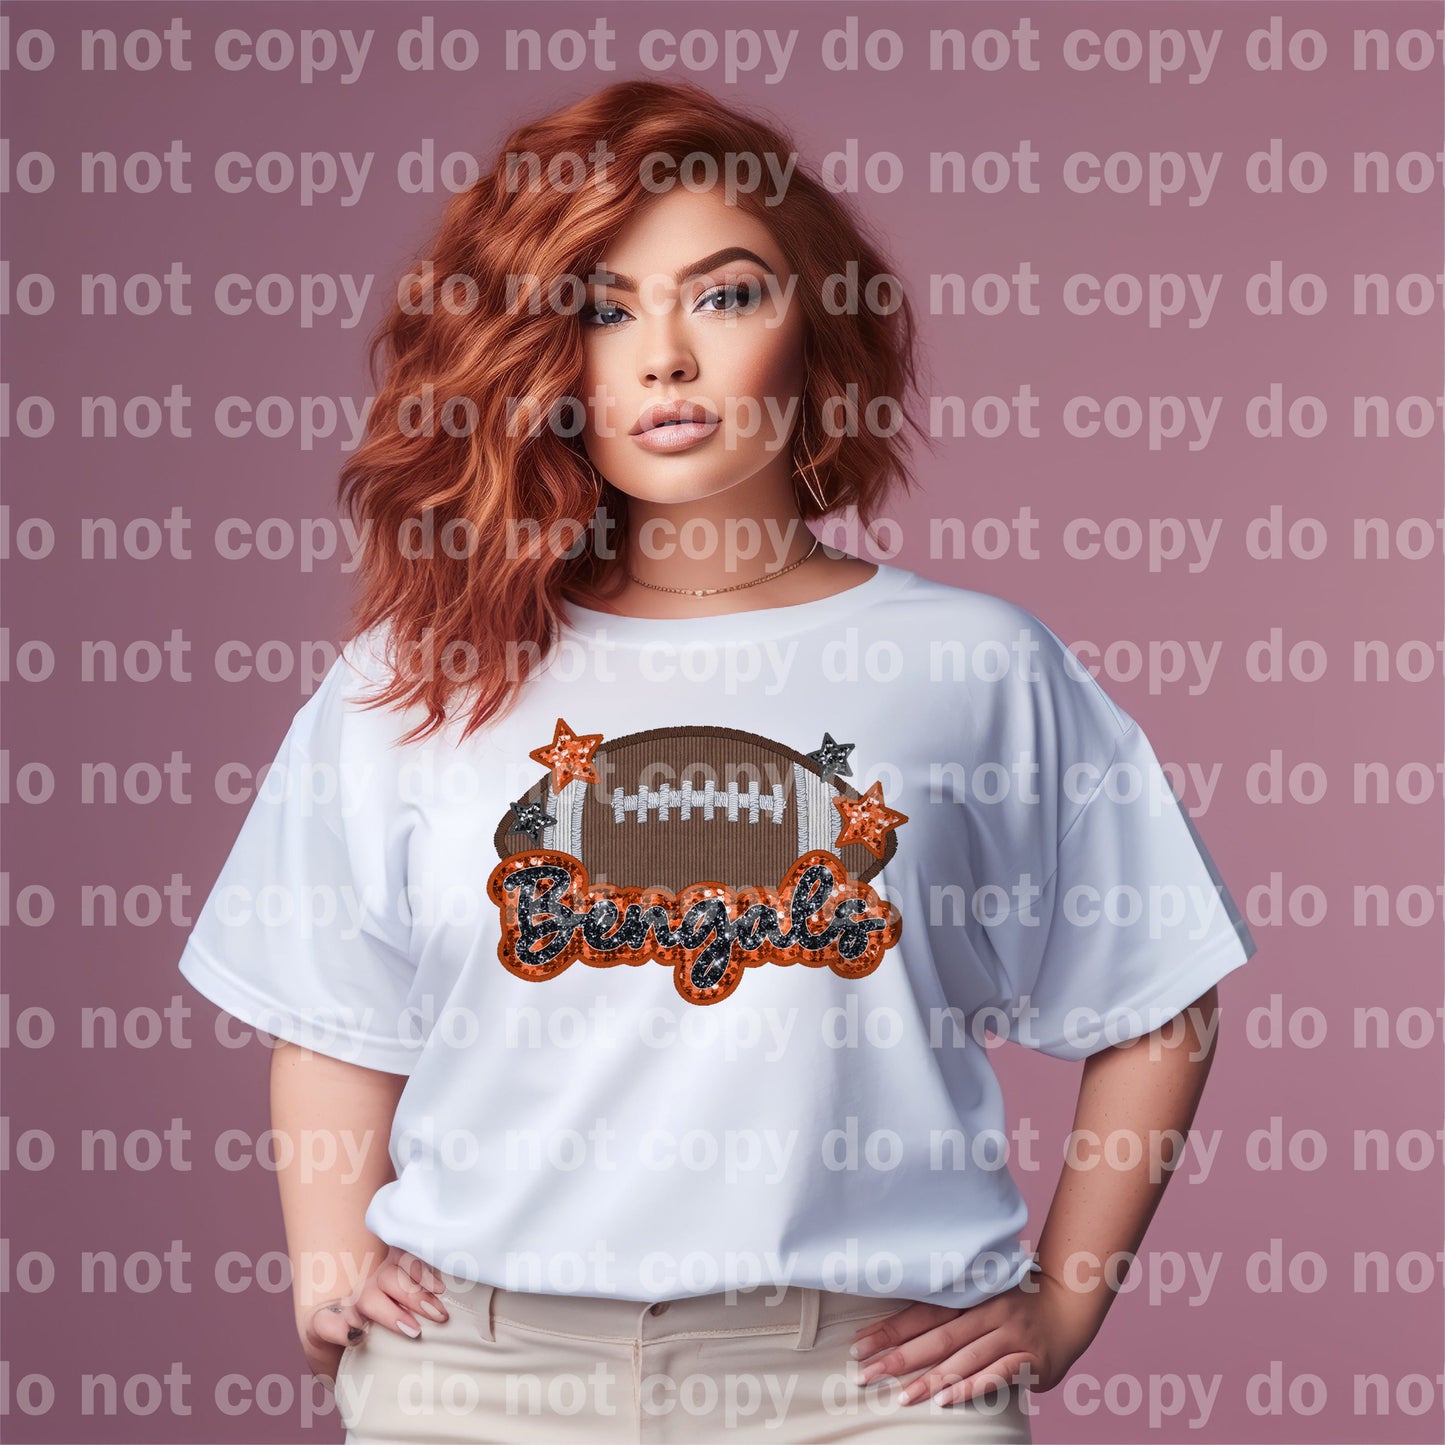 Bengals Football Dream Print or Sublimation Print